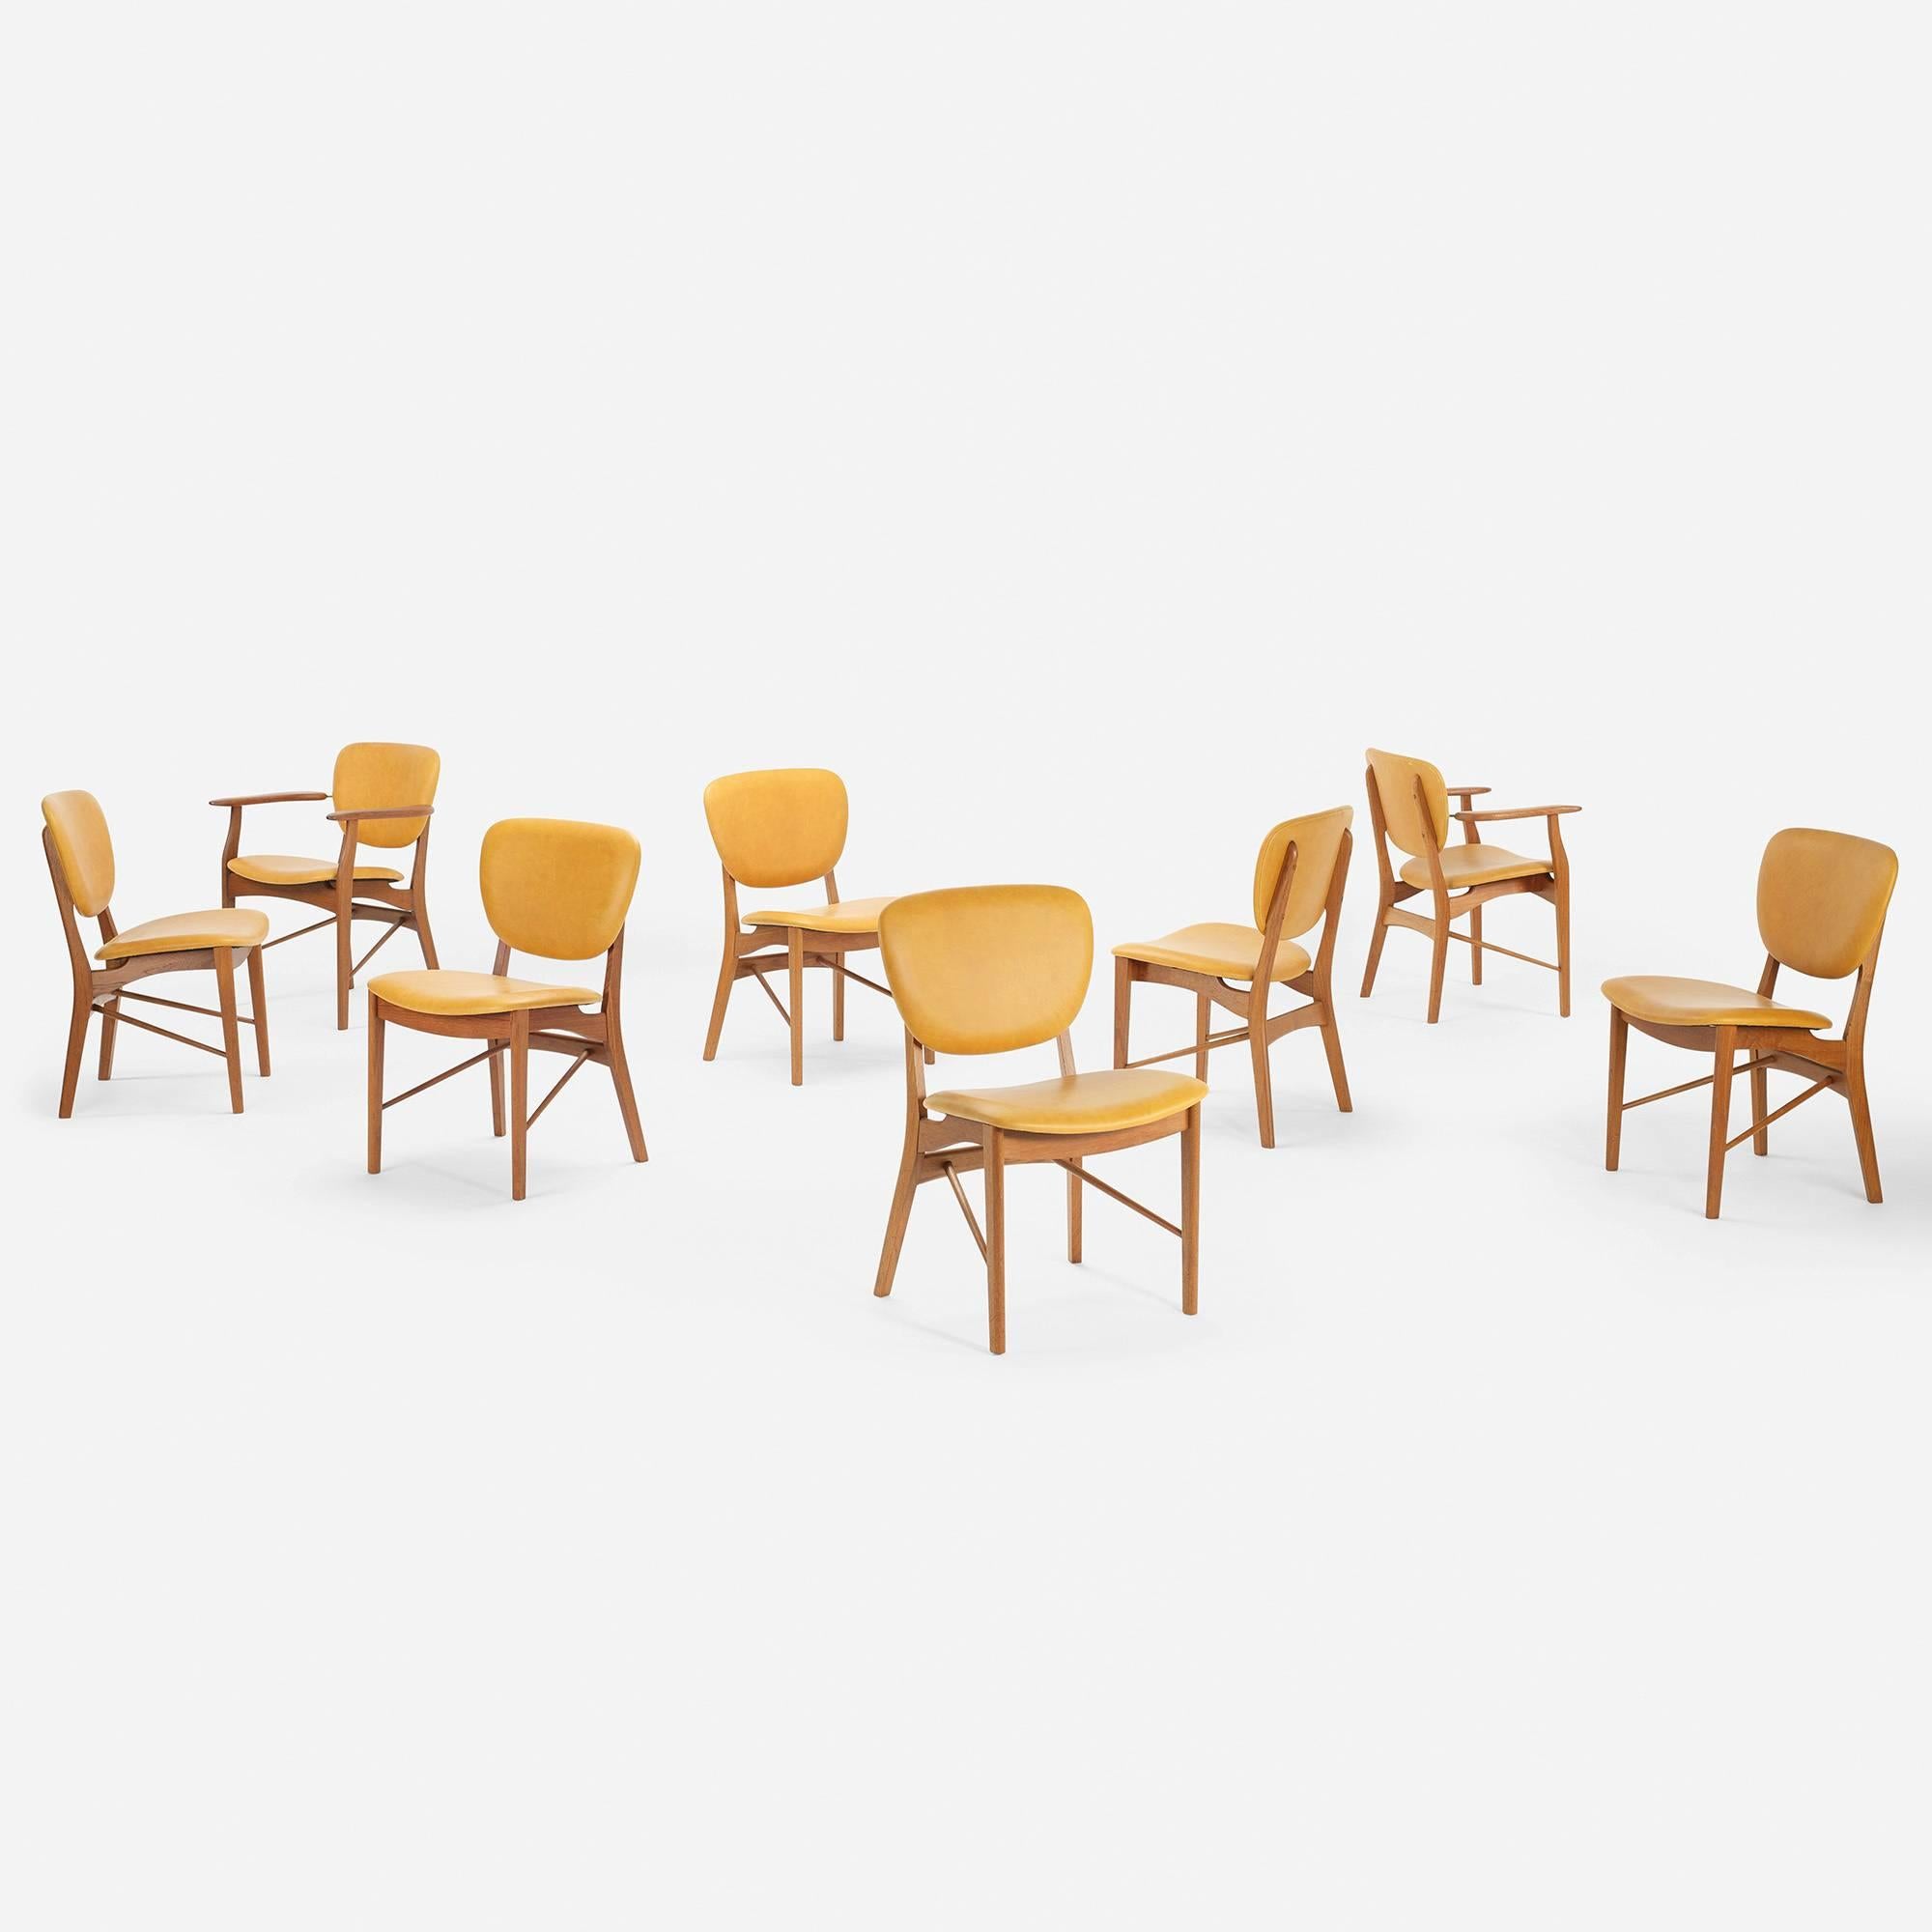 This set of chairs was in the collection of John H. Howe, architect and chief draftsman for Frank Lloyd Wright. Signed with branded manufacturer's mark to frame of each example: [Niels Vodder Cabinetmaker Copenhagen Denmark].

This chair design is